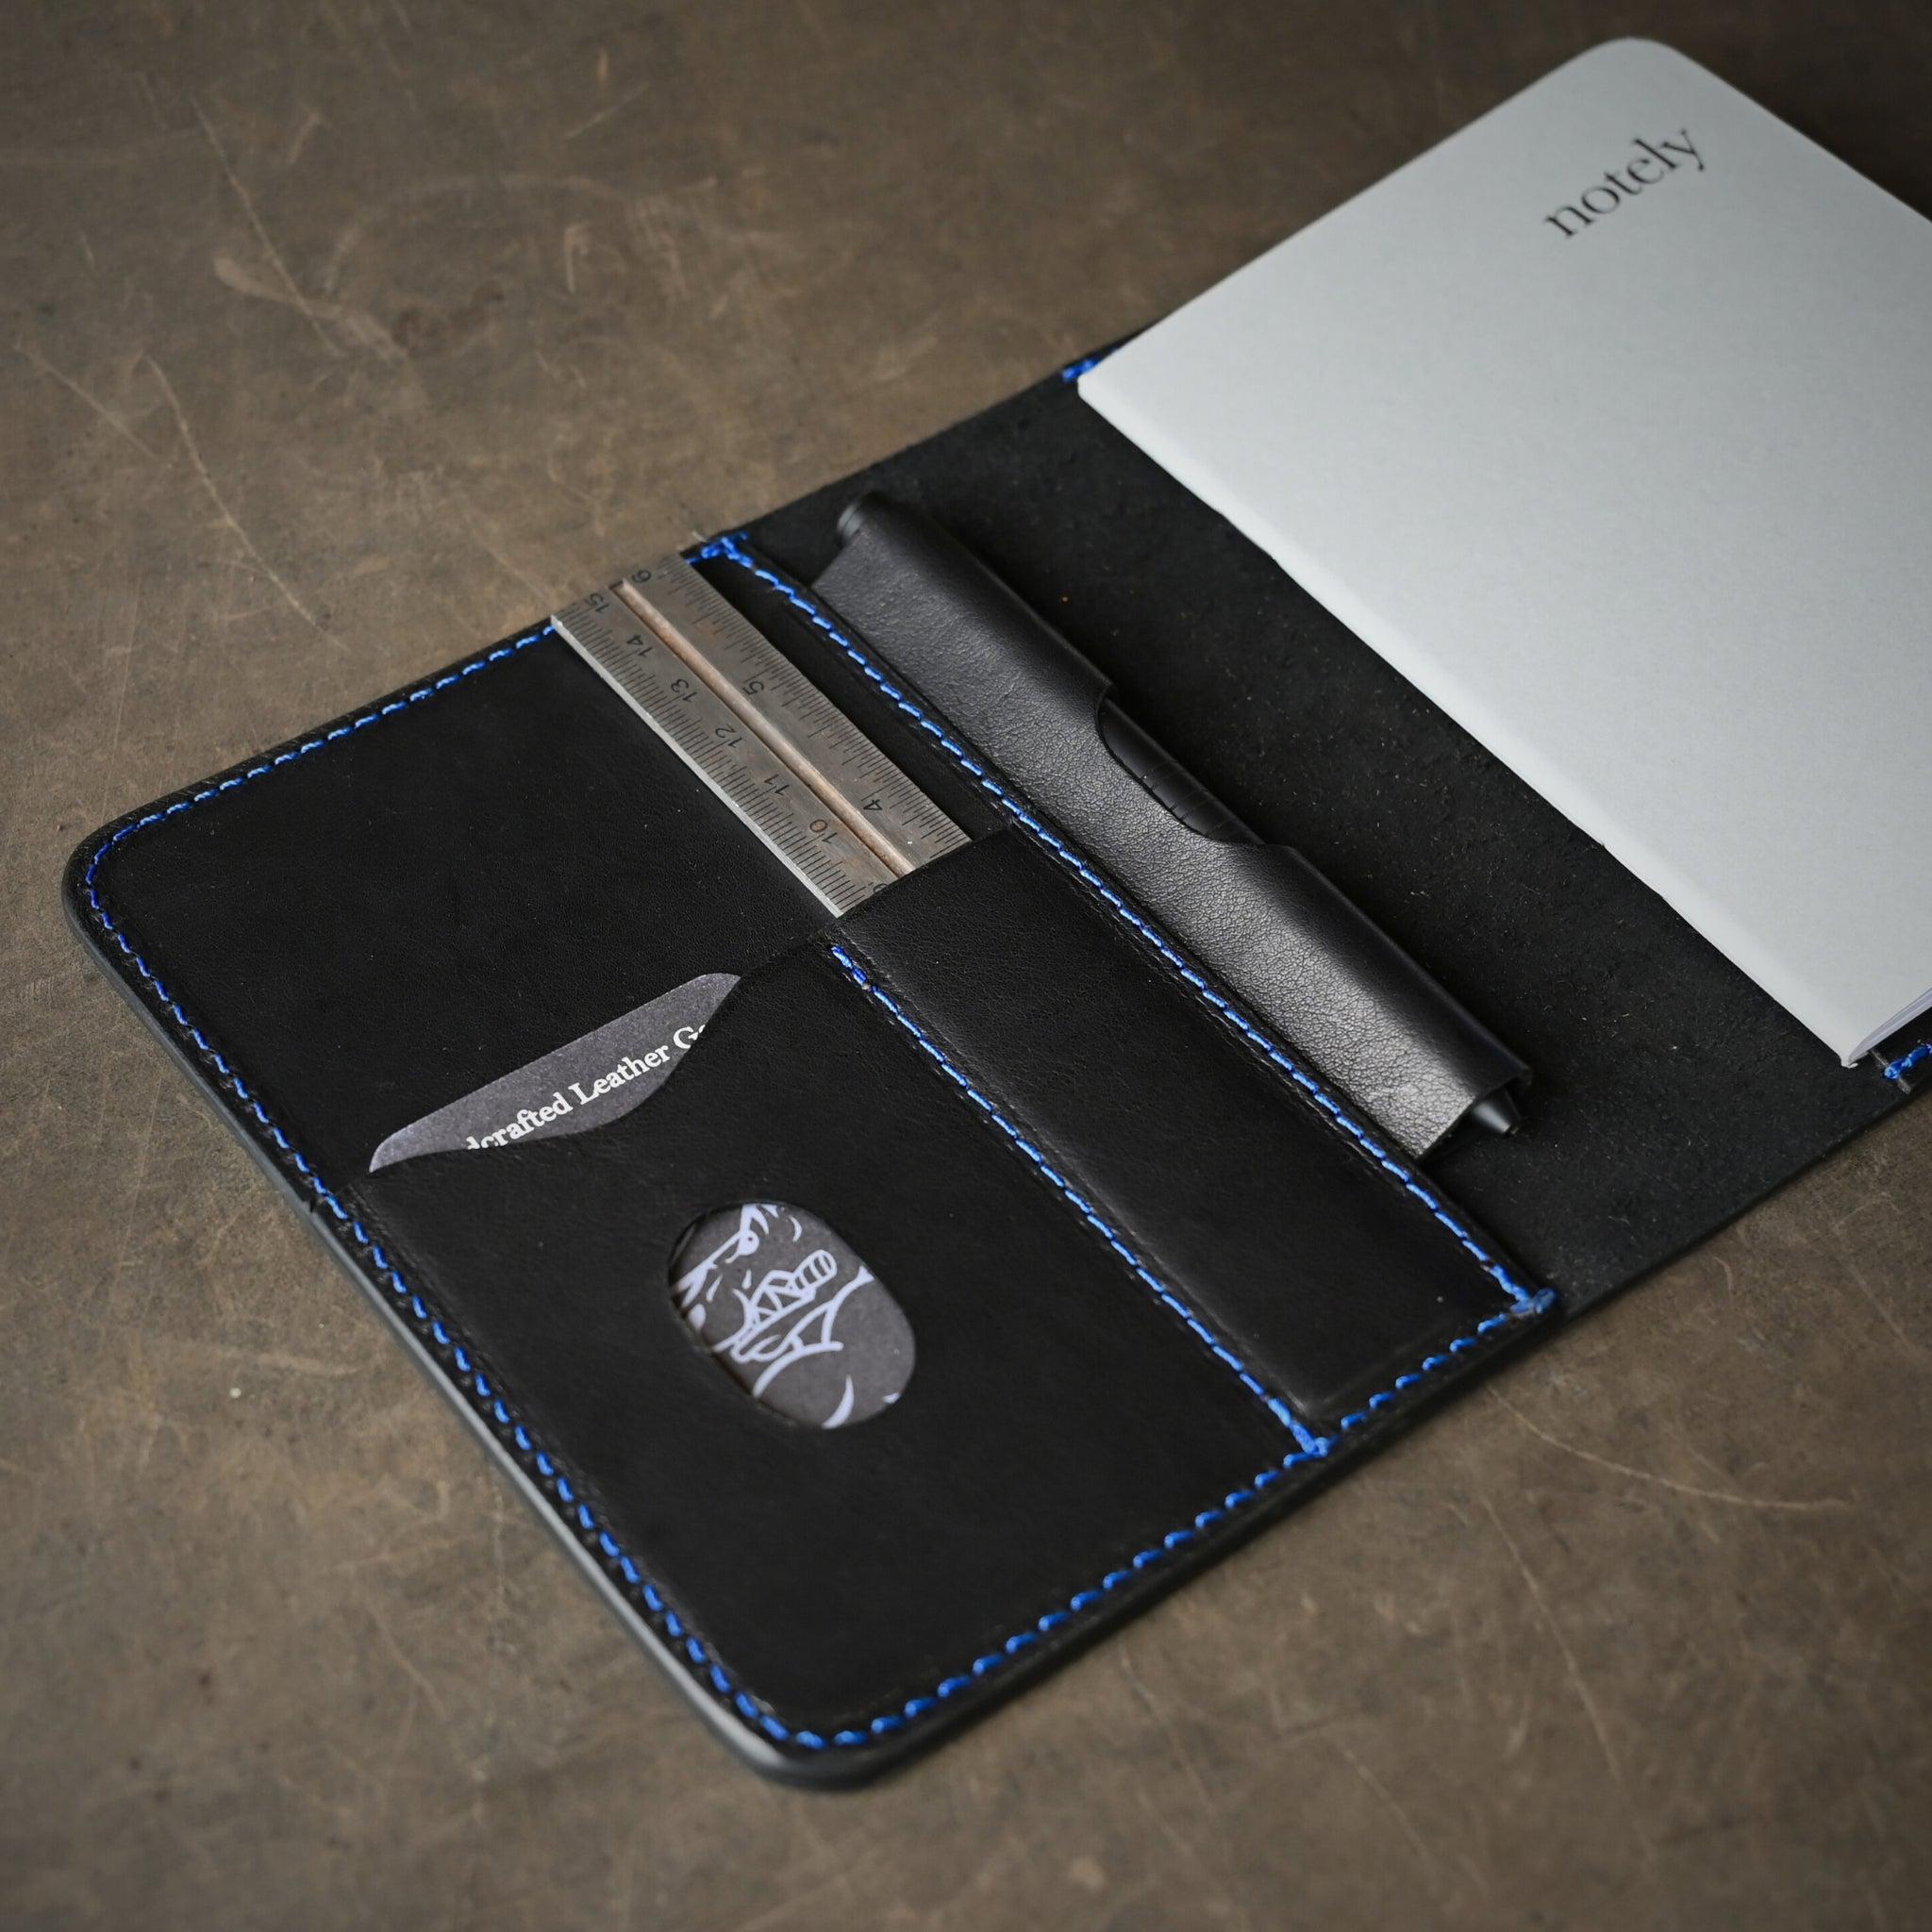 Ready To Ship A6 Leather Notebook Cover Black w/ Blue Thread